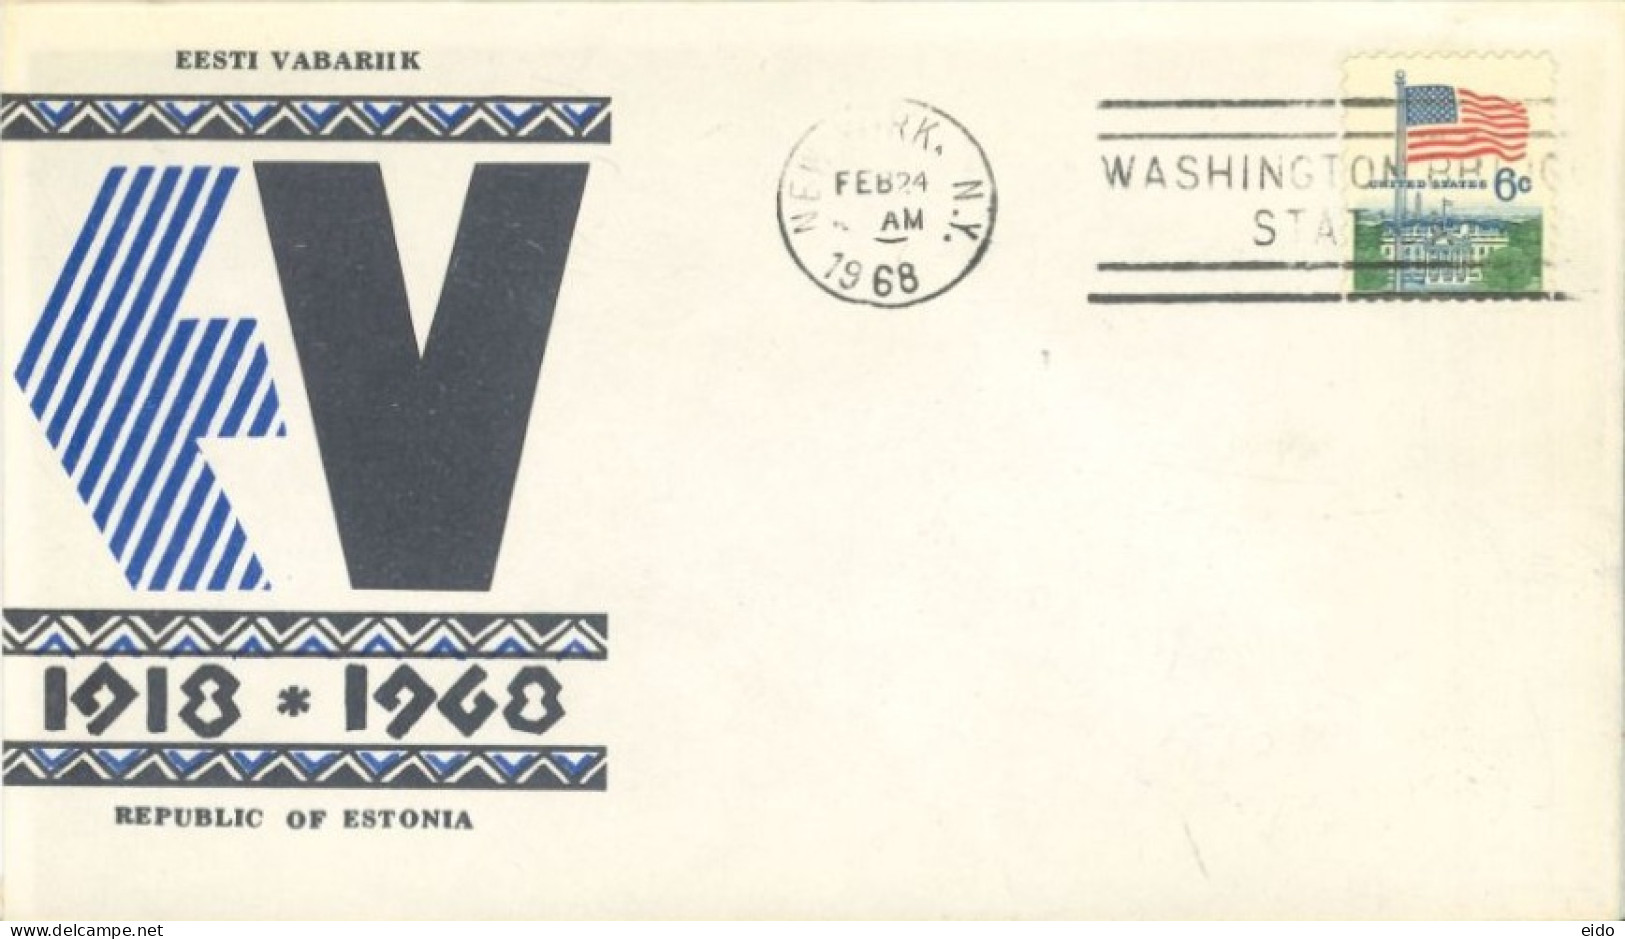 U.S.A.. -1968 -  OFFICIAL STAMP COVER OF 50th ANNIVERSARY OF REPUBLIC OF ASTONIA. - Brieven En Documenten